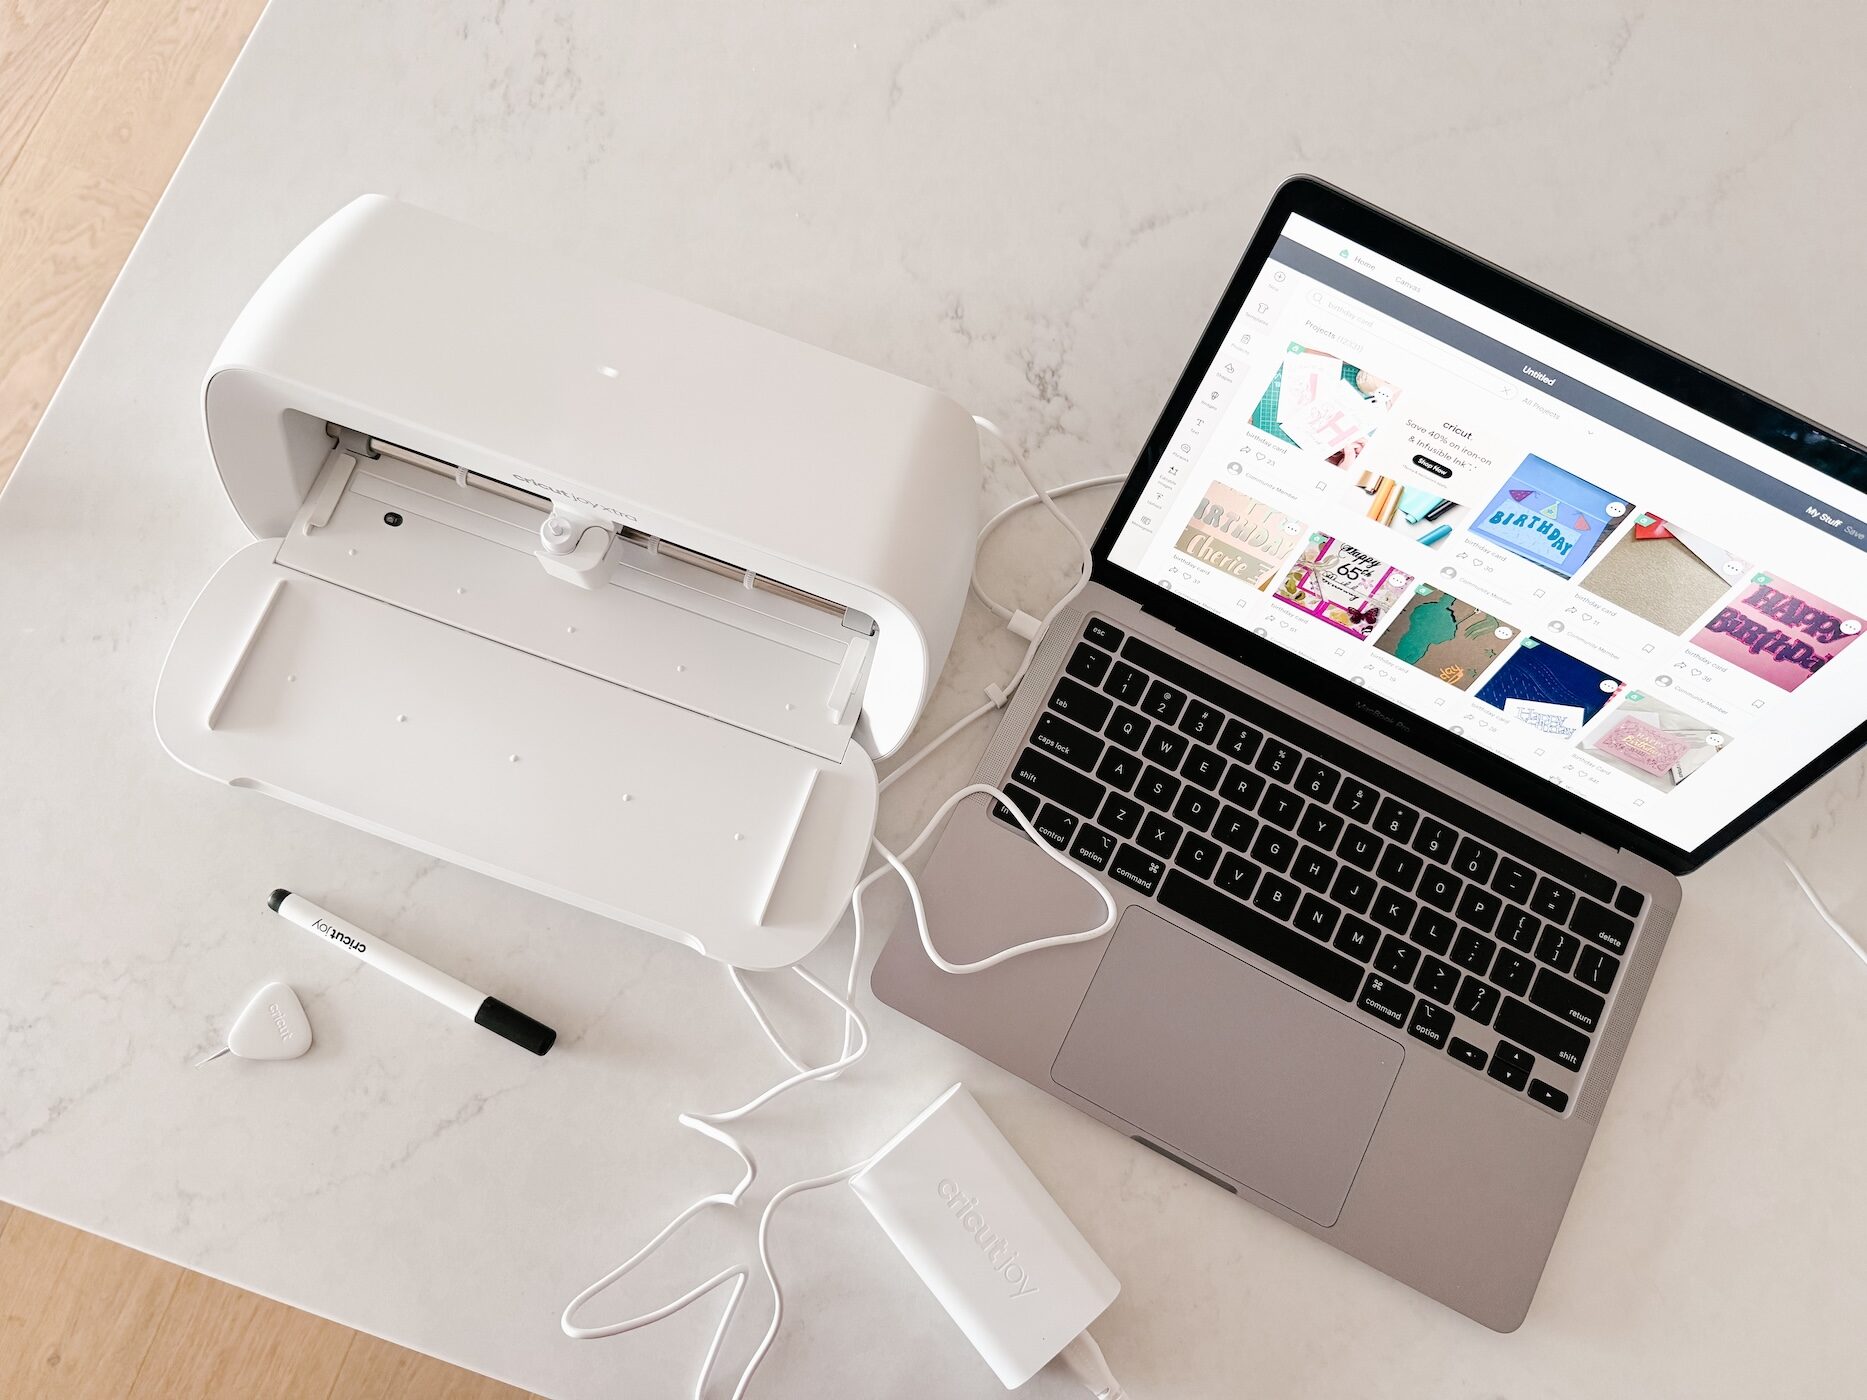 Cricut Joy is Perfect for Every Desk! See Everything It Can Make